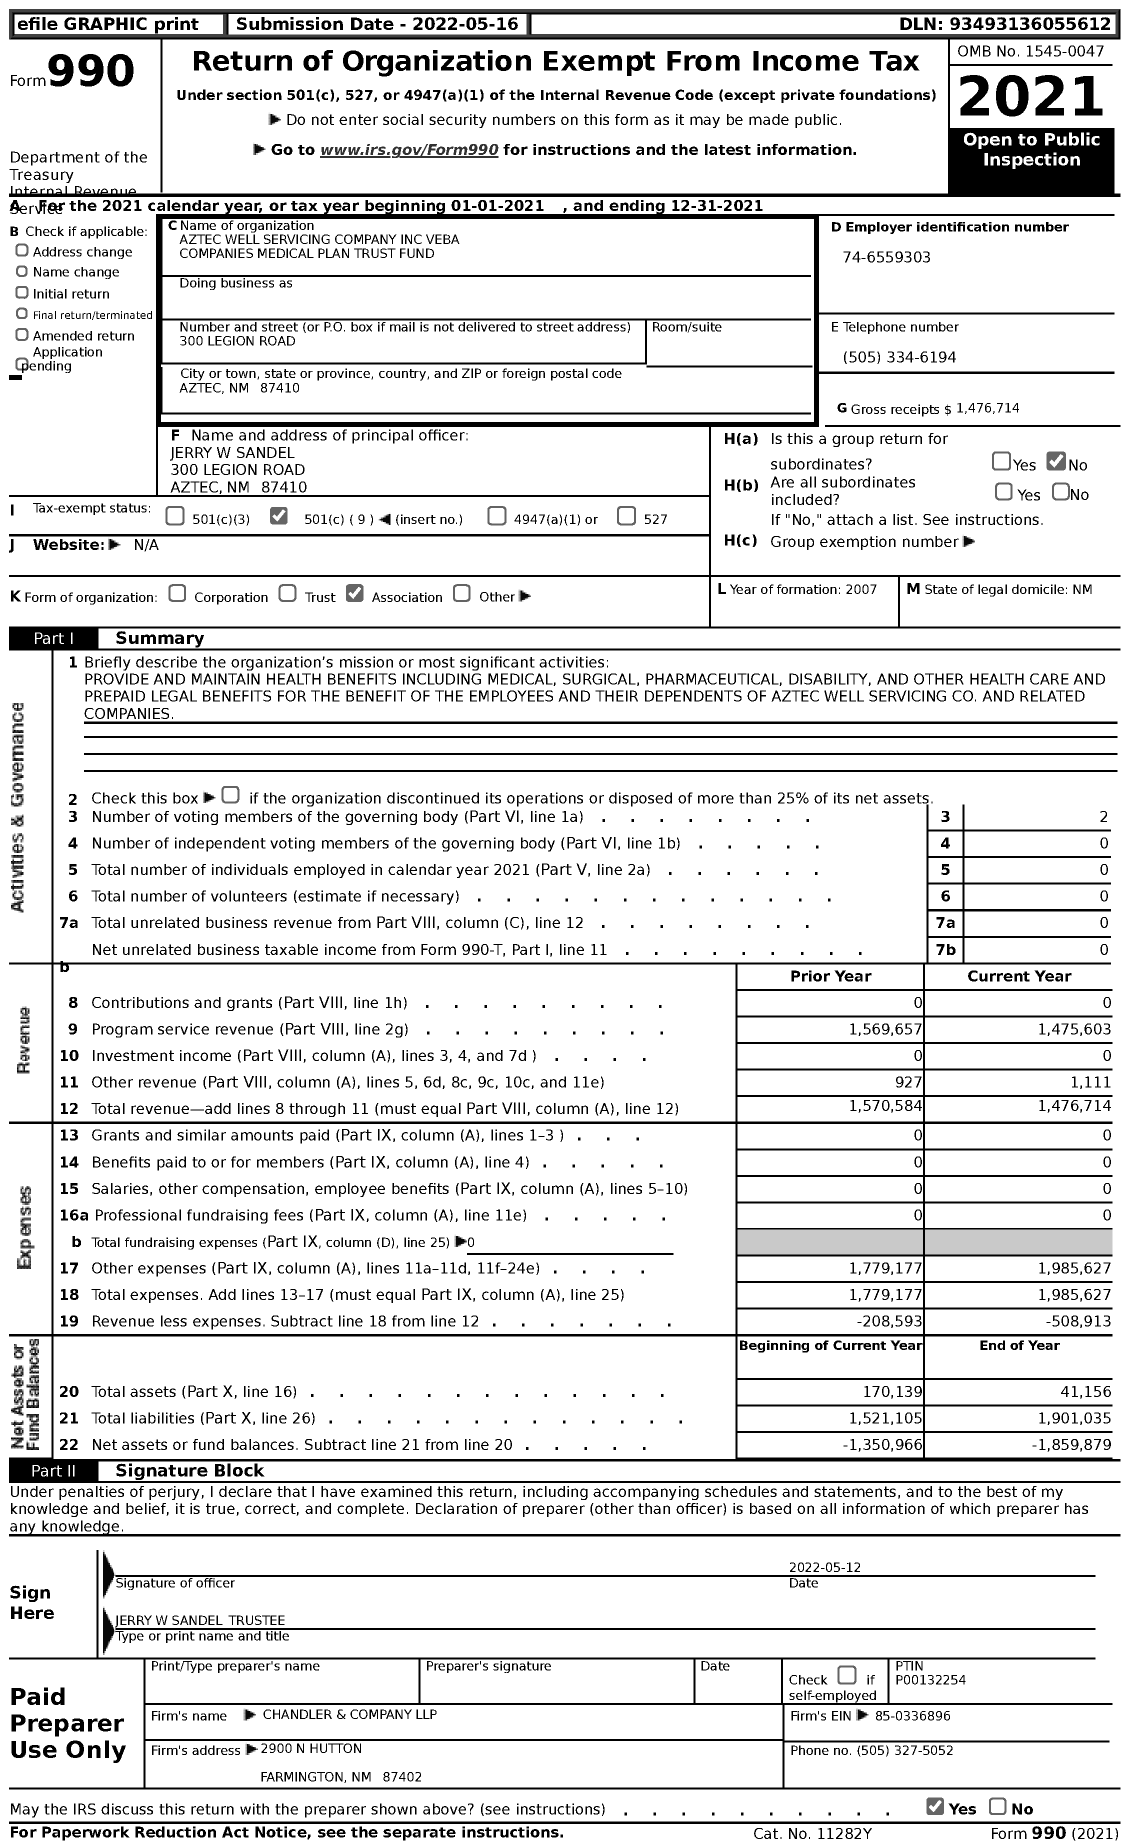 Image of first page of 2021 Form 990 for Aztec Well Servicing Company Veba Companies Medical Plan Trust Fund